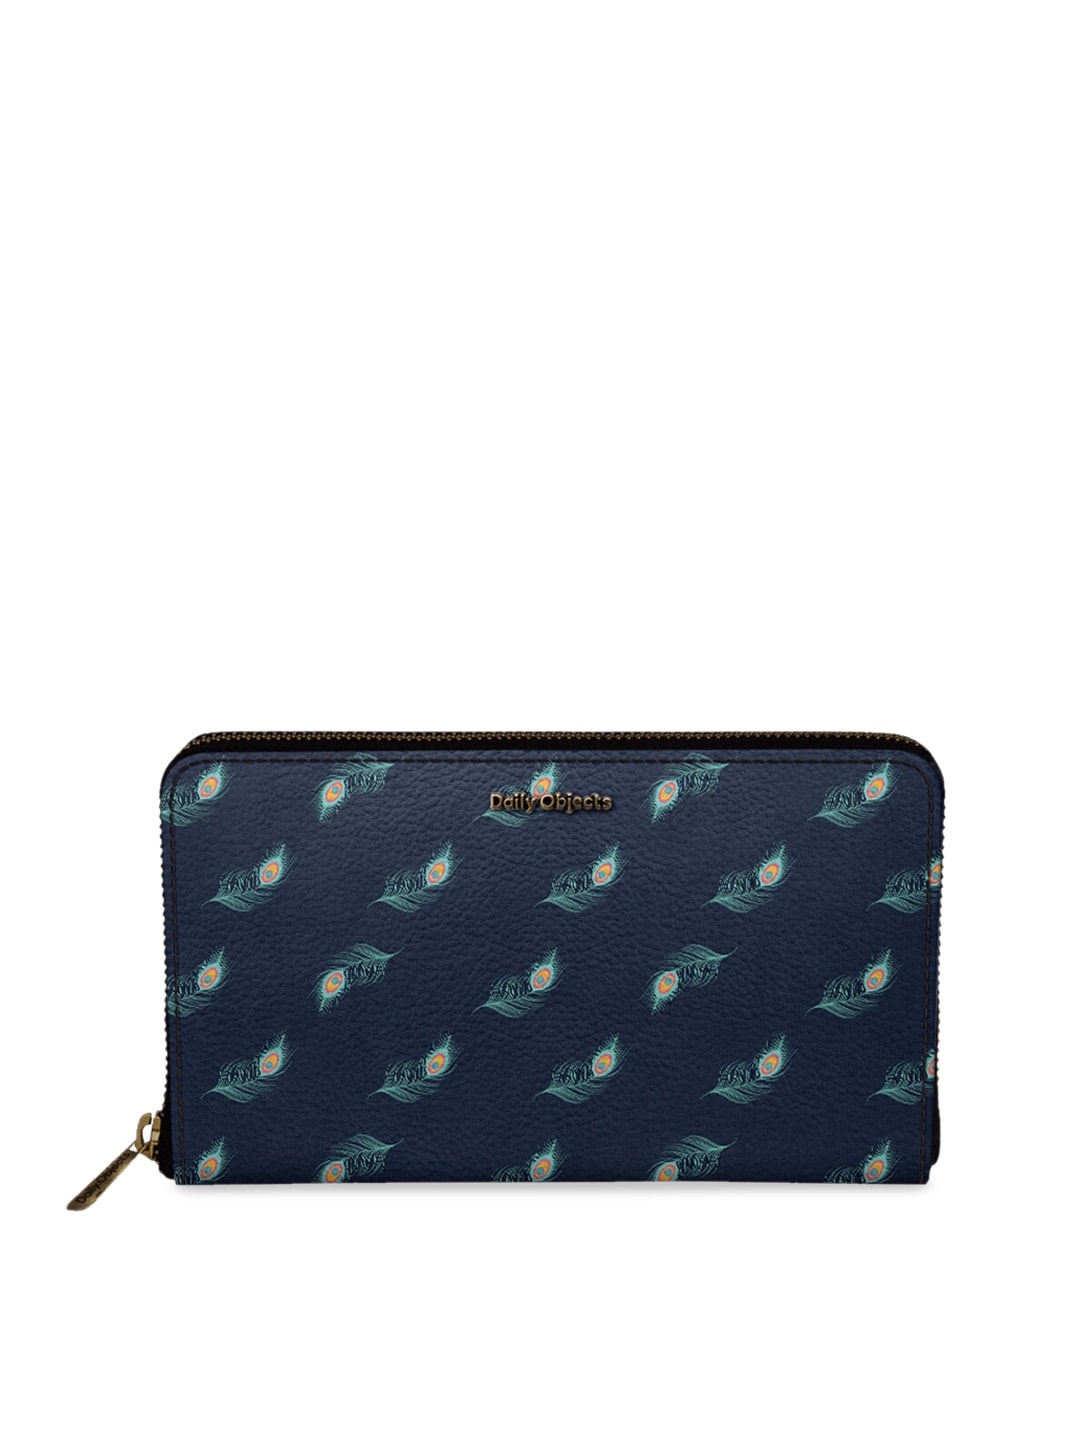 DailyObjects Women Blue Printed Zip Around Wallet Price in India